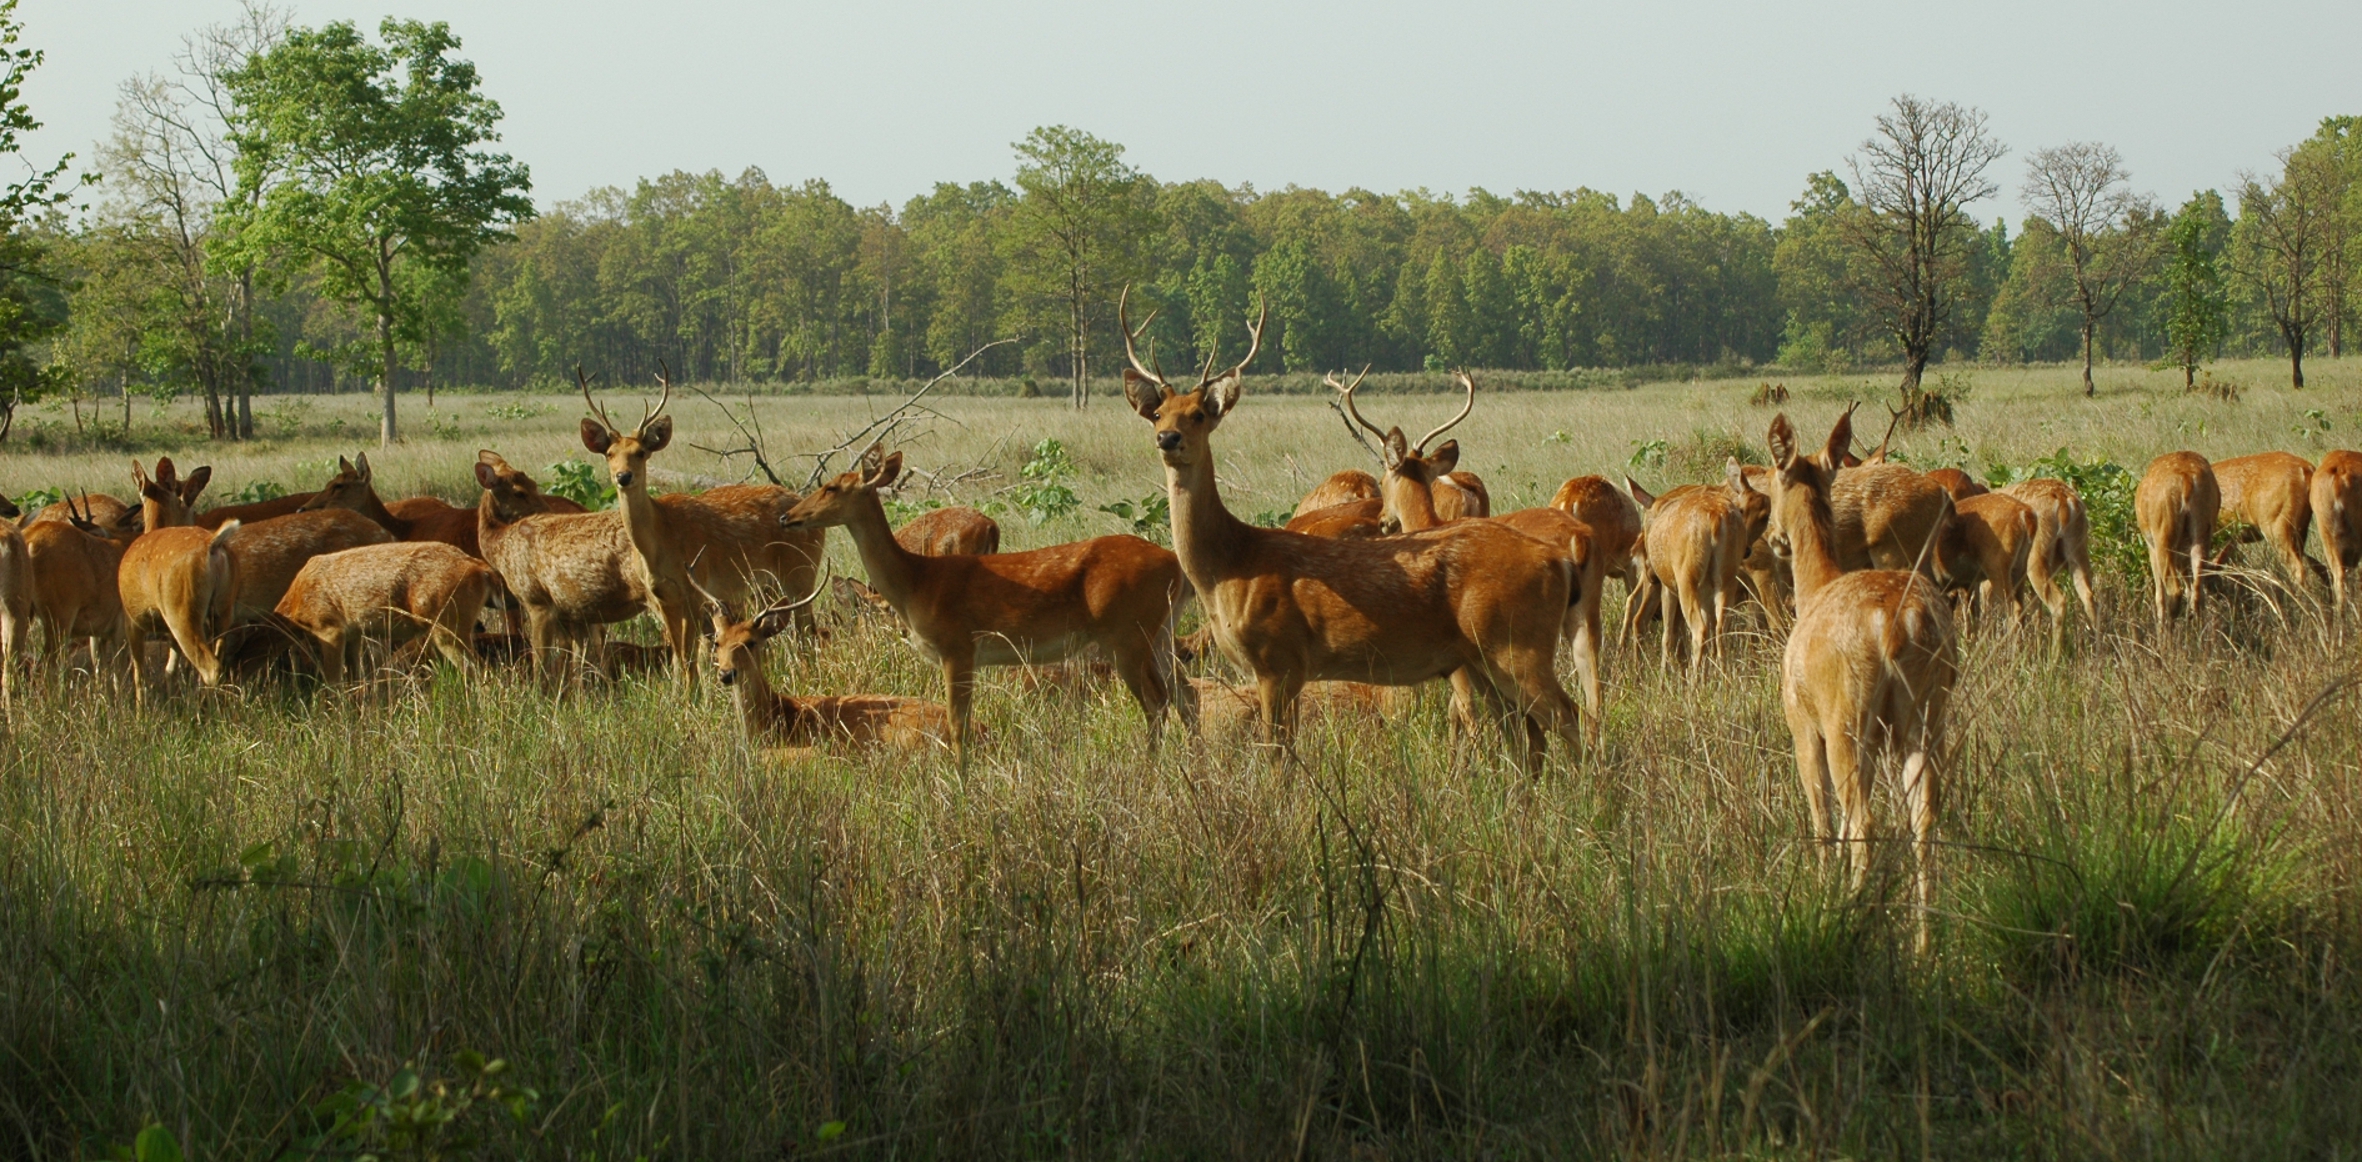 13 reindeer reached Satpura from Kanha to increase the family